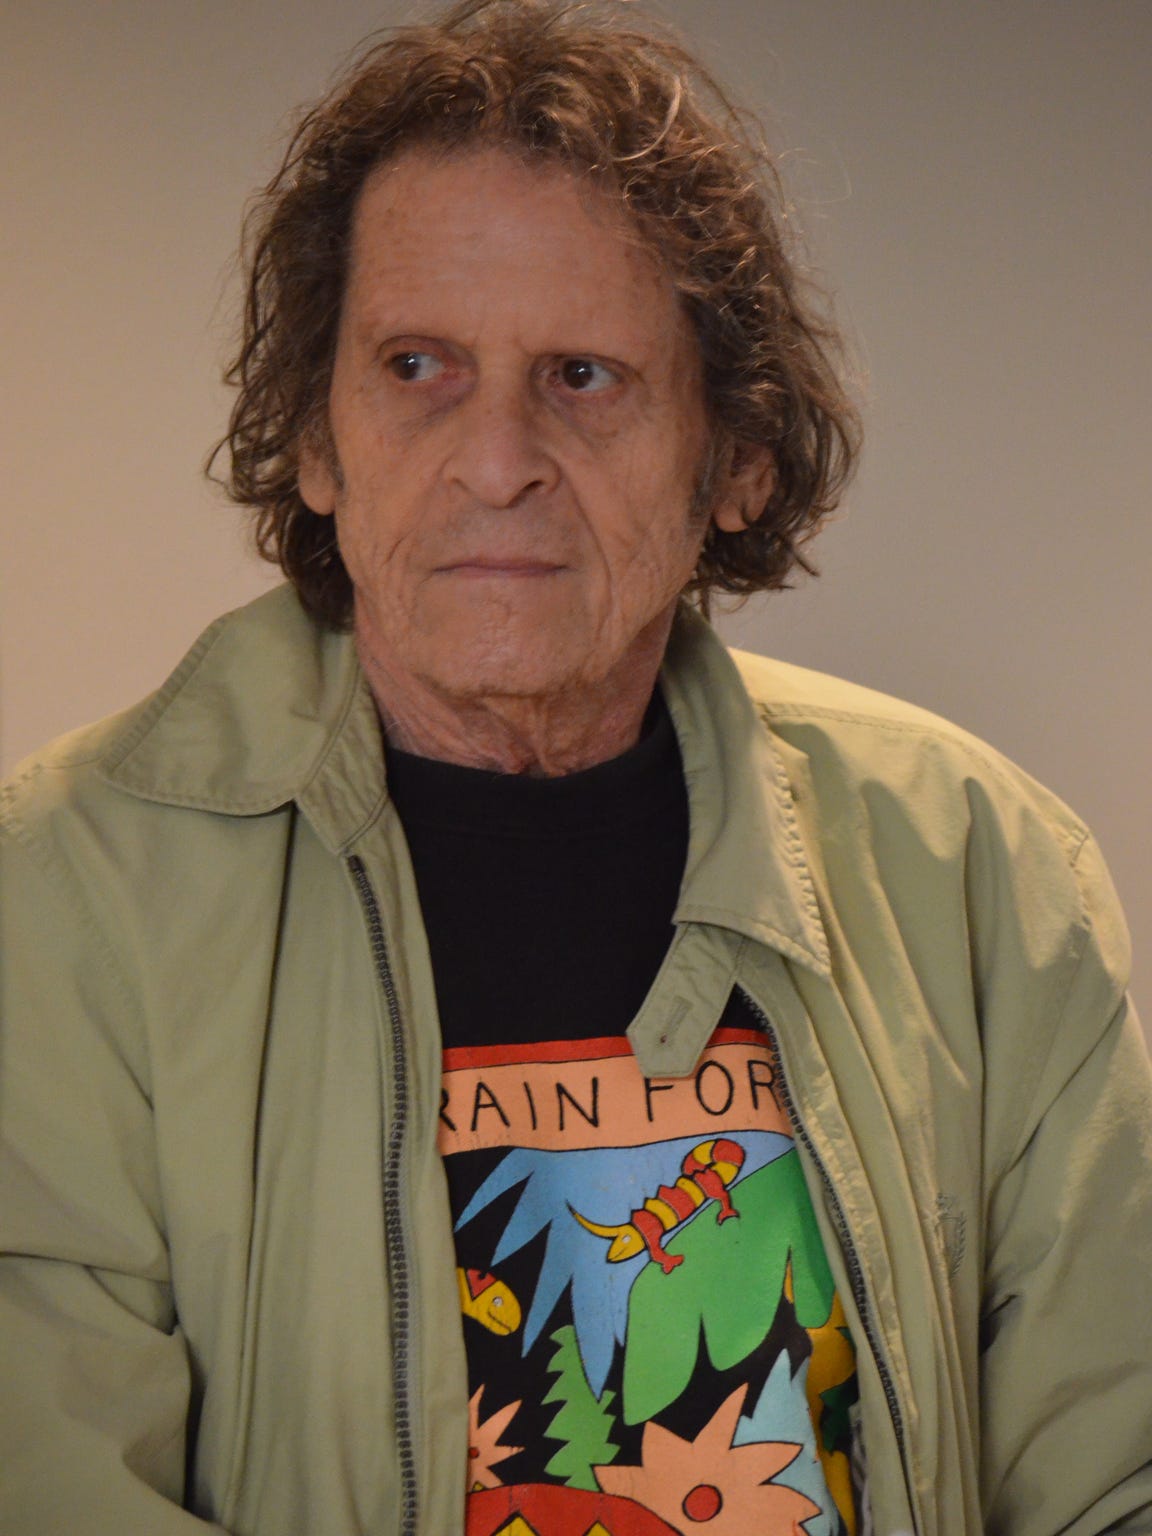 Paul Krassner, co-founder of the Yippies and publisher of The Realist magazine, was honored with a Lifetime Achievement Award by the Veterans for Peace Jon, Castro Chapter 19 in Cathedral City on Monday, Feb. 16, 2015.